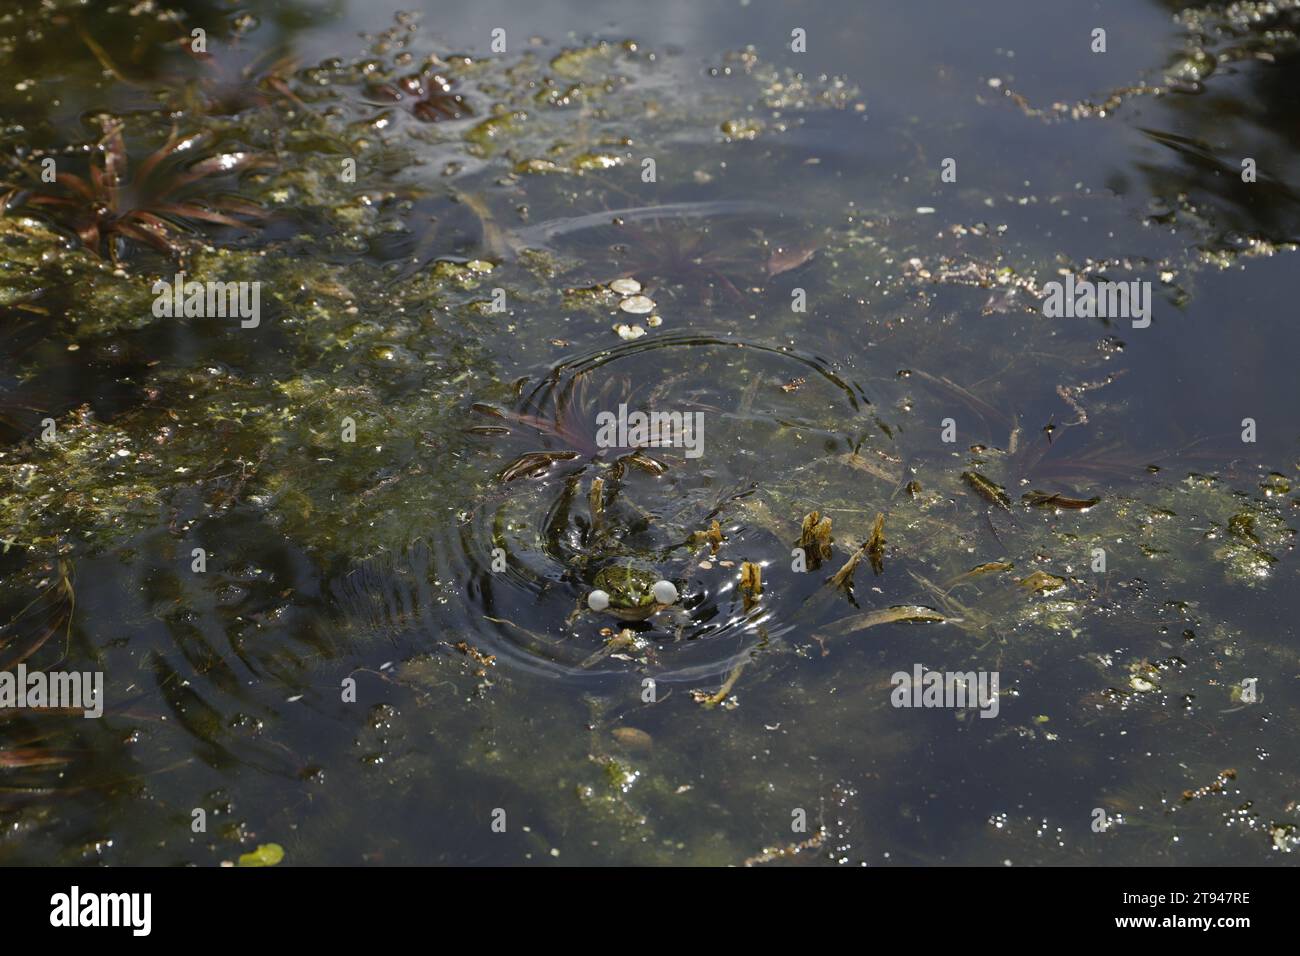 Croaking frog in a pond Stock Photo